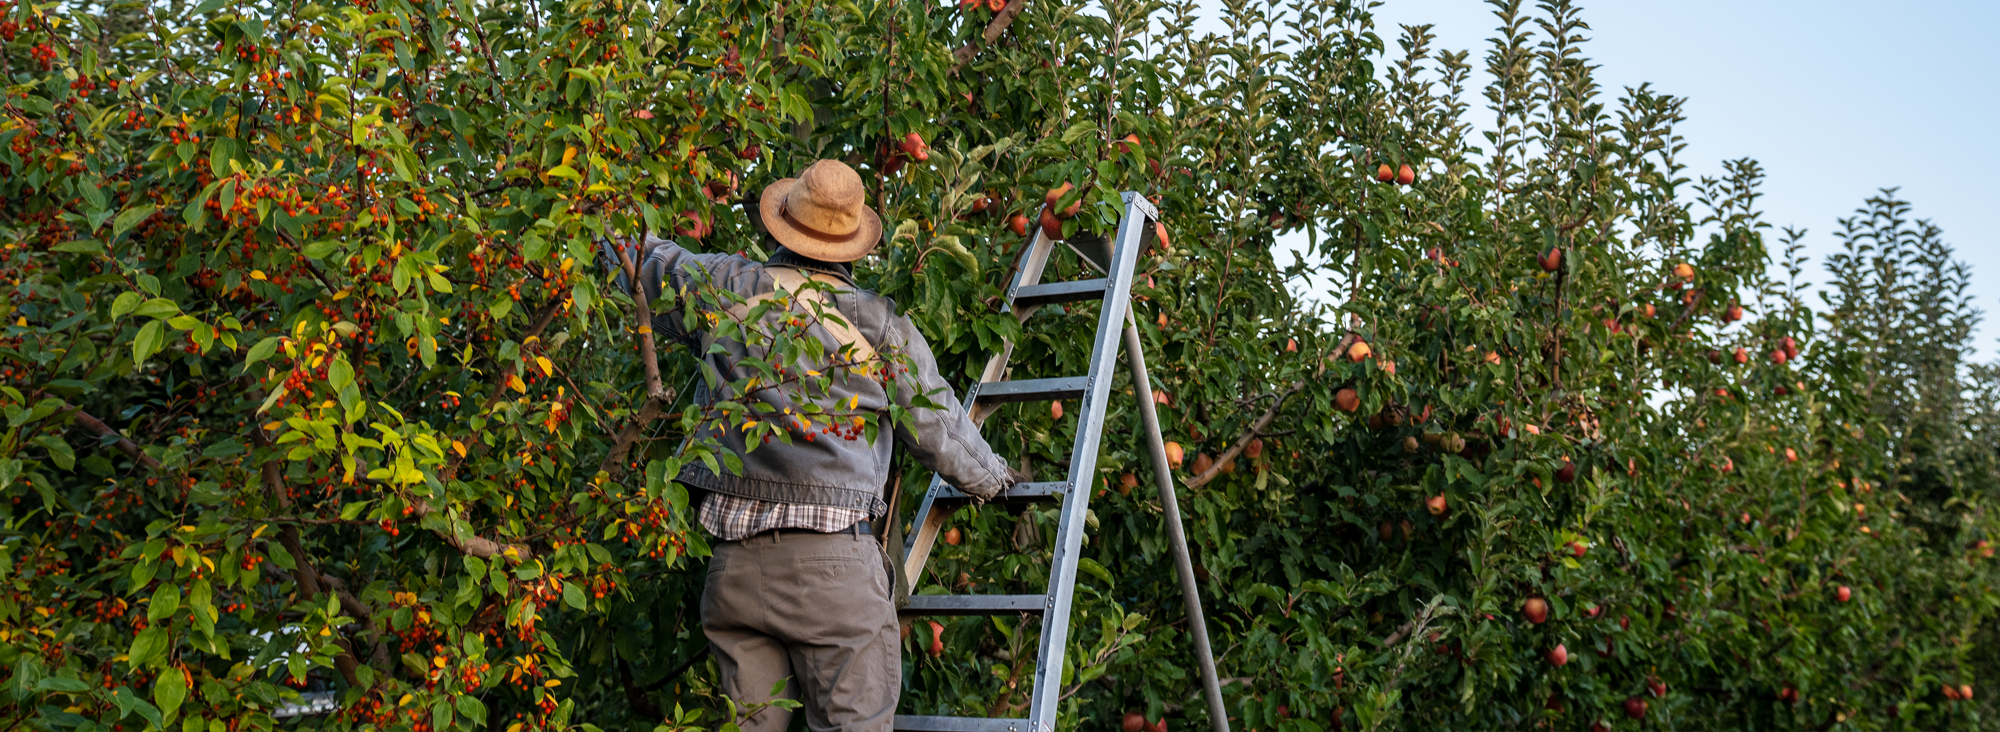 Ganaz H2A Program Header - H-2A worker harvesting cherries and applies on a ladder in Washington